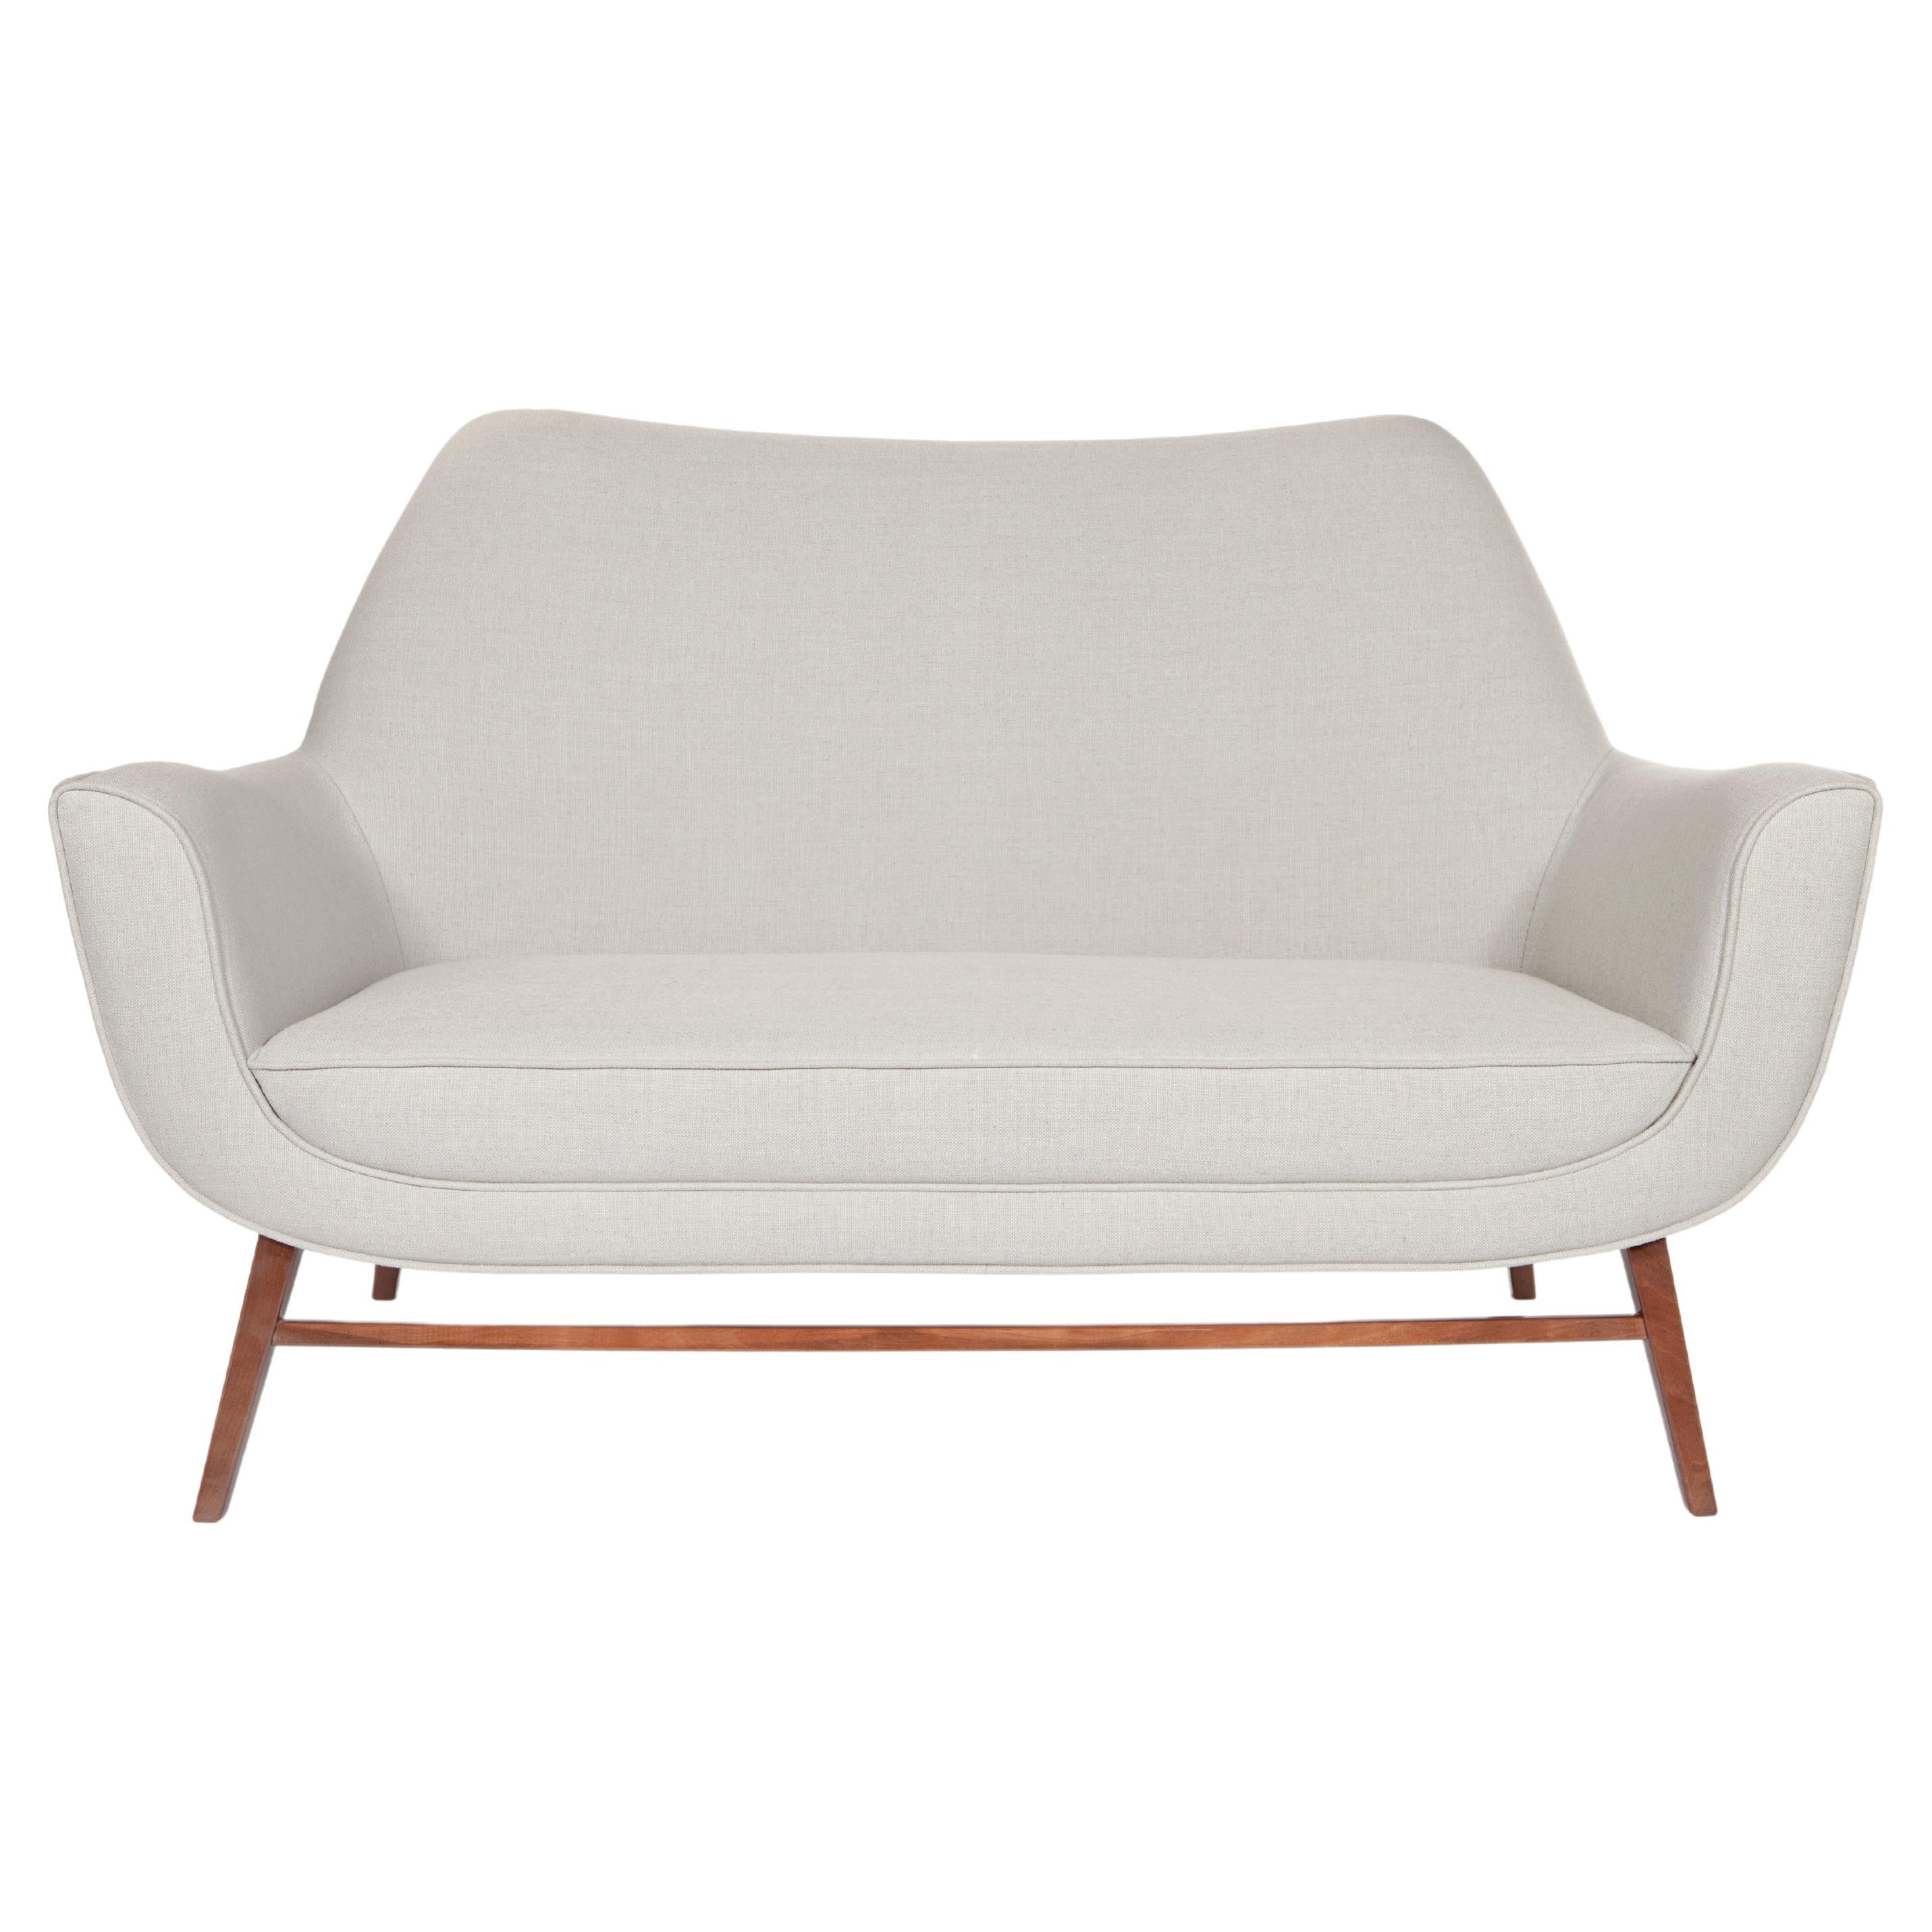 Western 2 Seat Sofa by InsidherLand For Sale